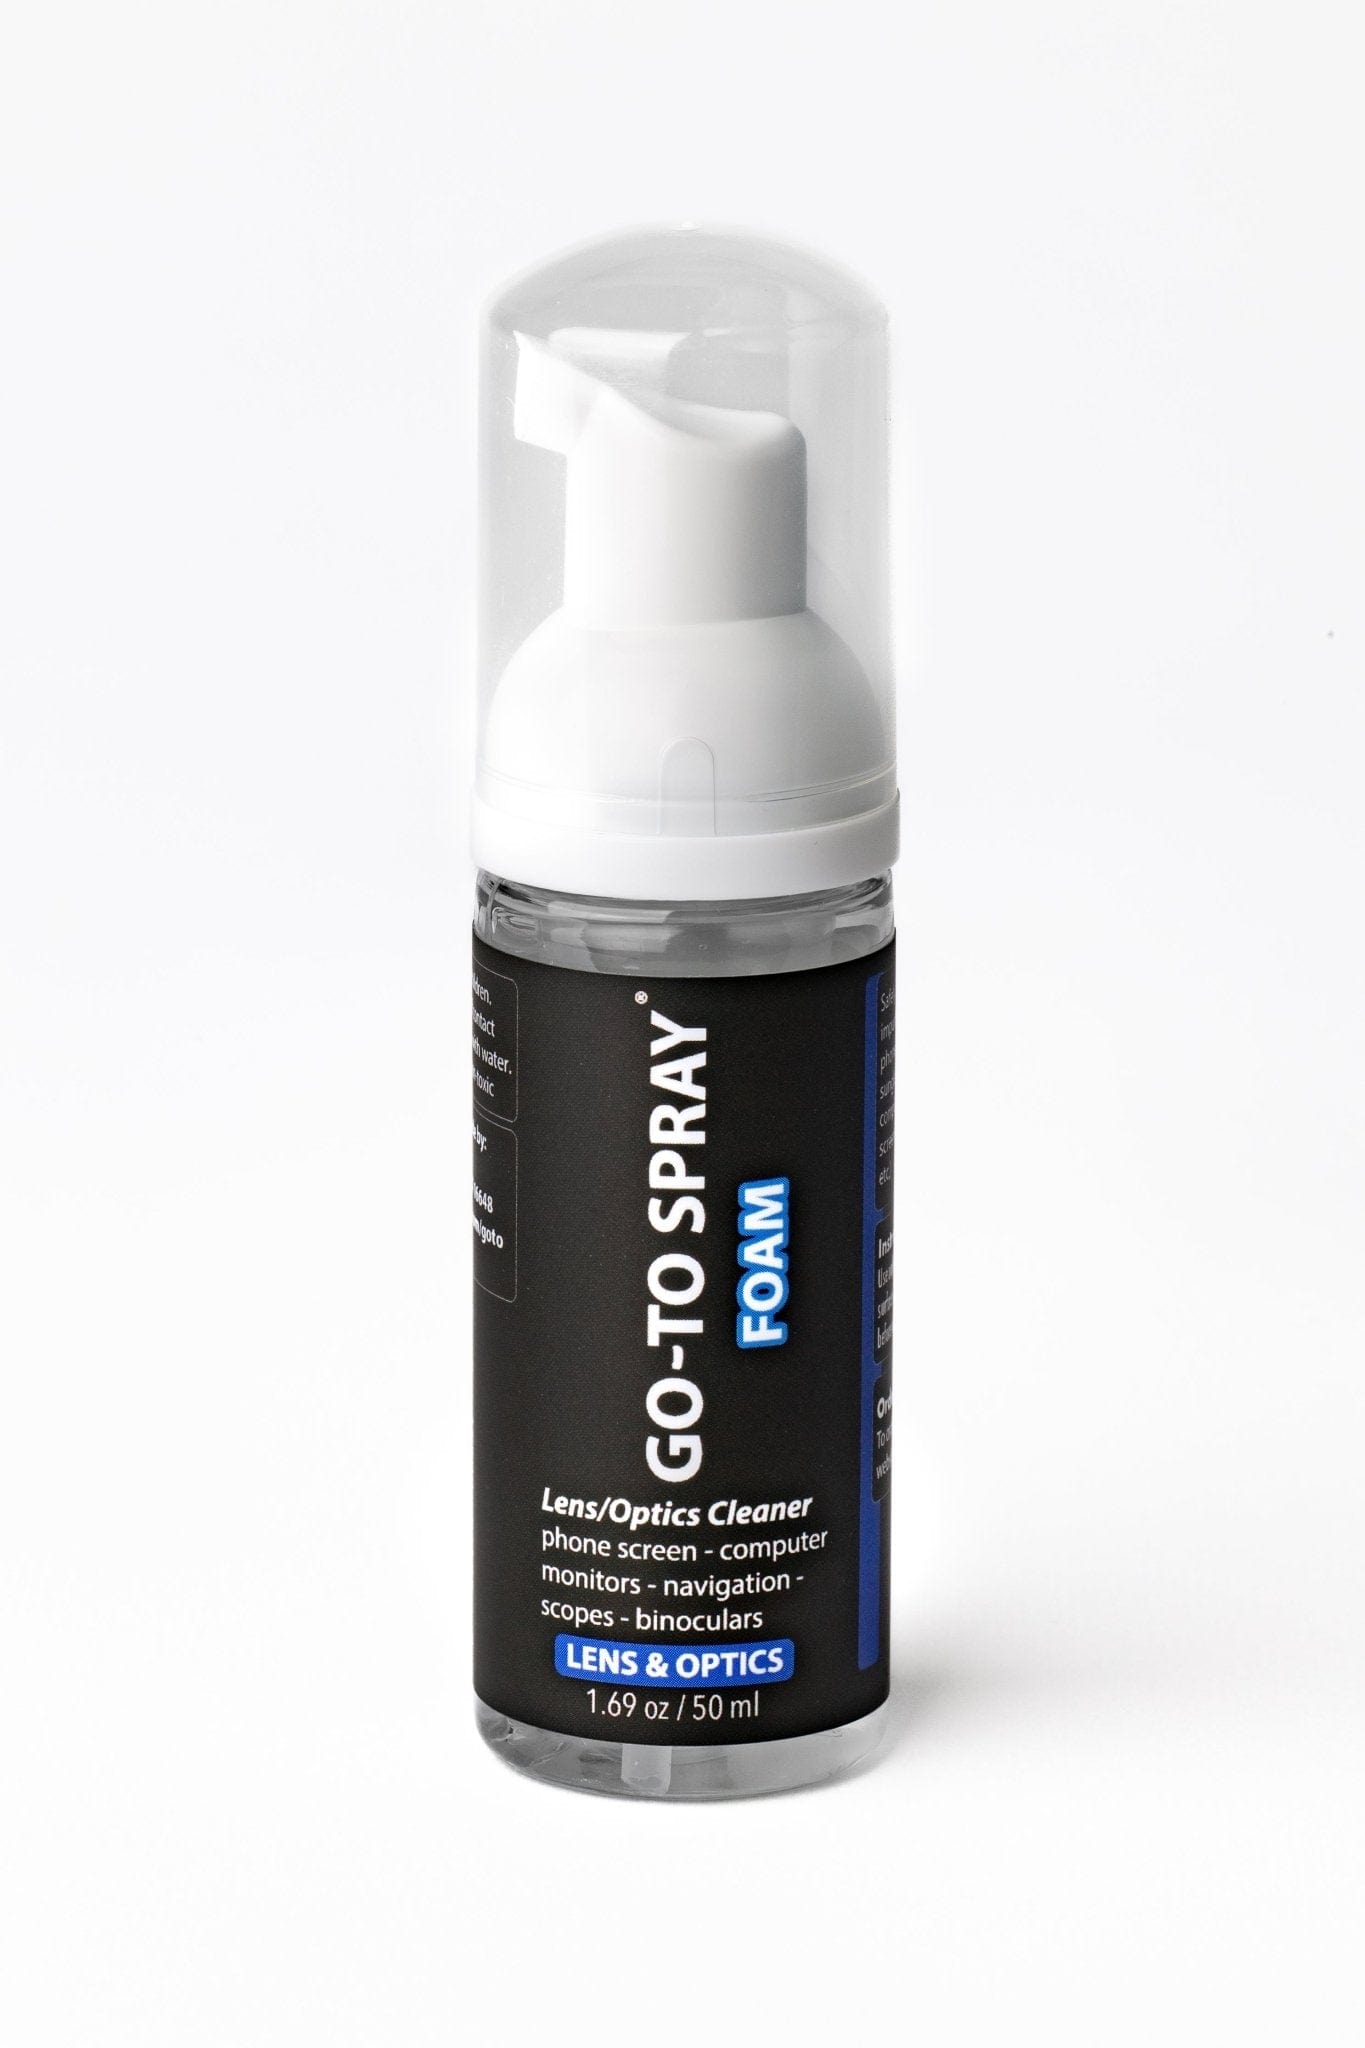 Go-To-Spray Sunglass & Eyeglass Cleaner bottle, compact and easy-to-use design, perfect for on-the-go cleaning of glasses.